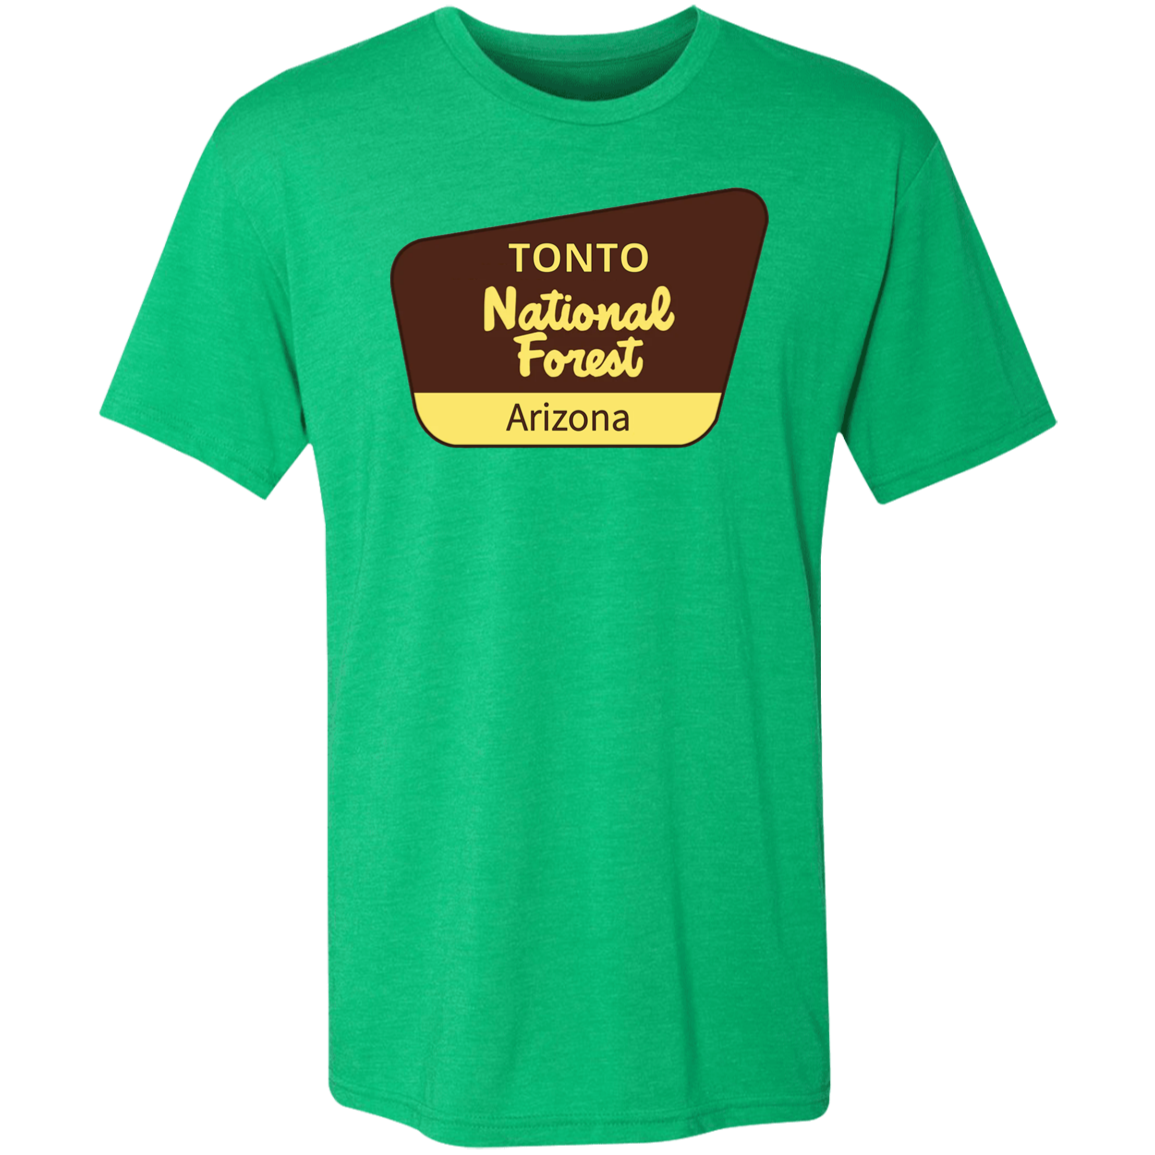 Arizona Trails Tonto National Forest - Premium Triblend National Forest T-Shirt